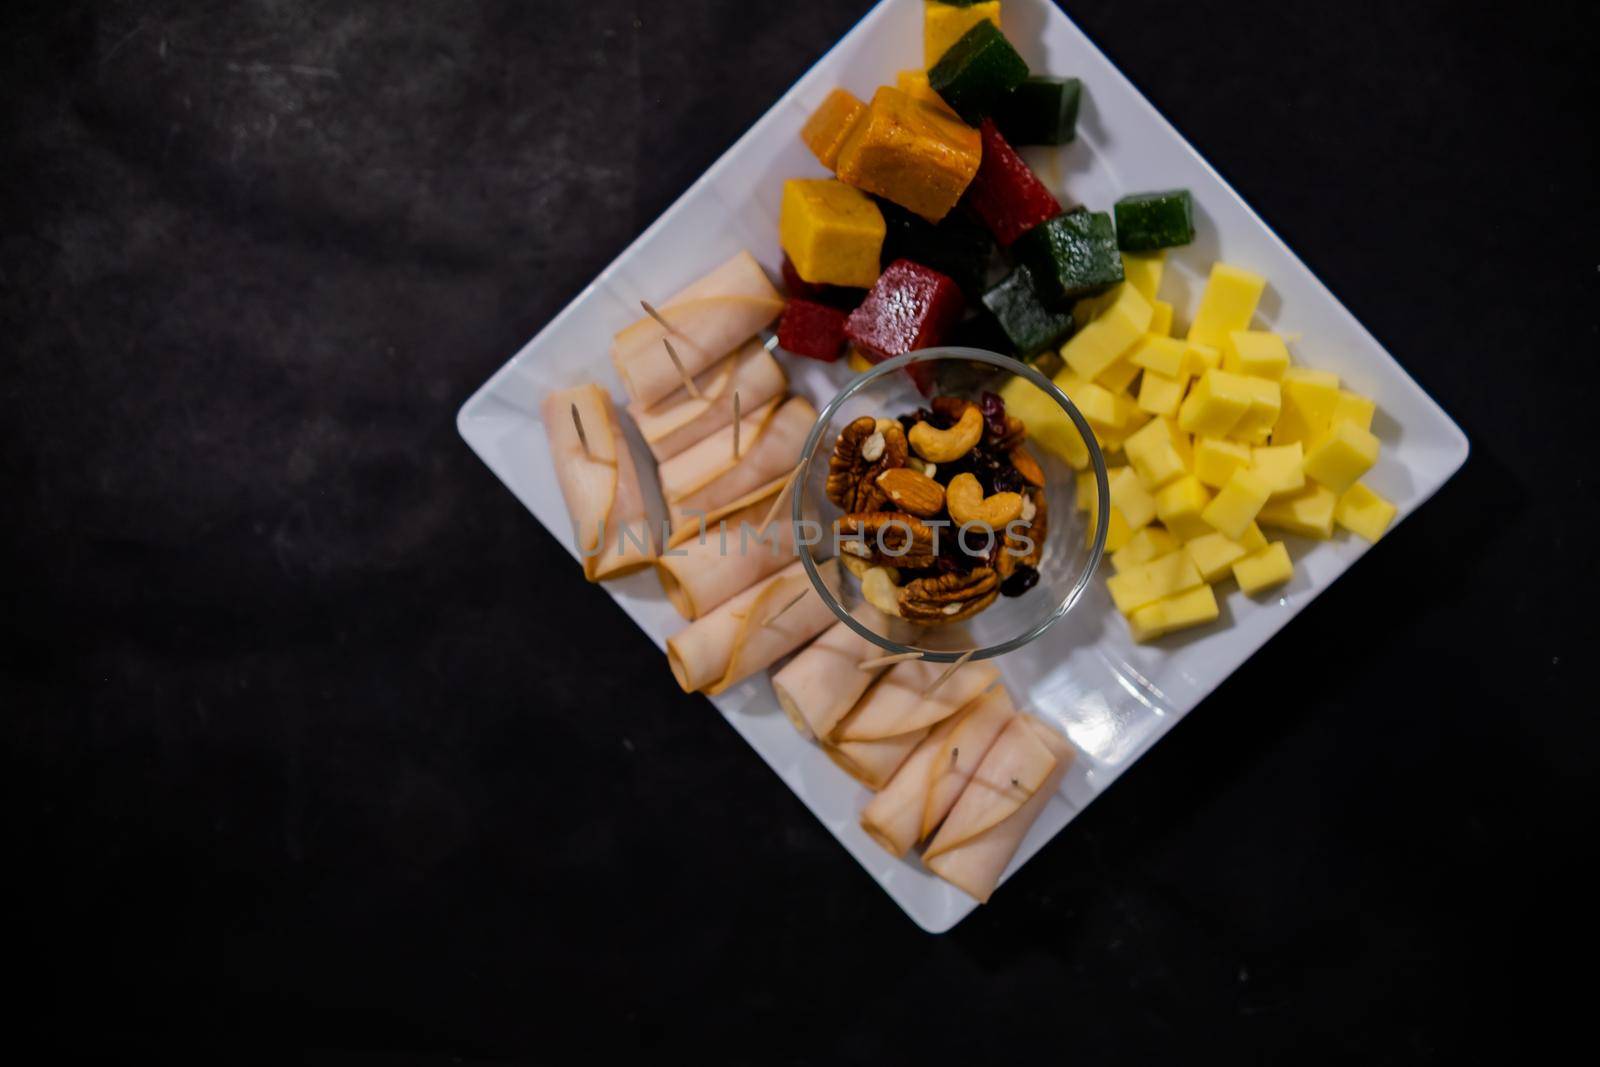 Top view of turkey ham rolls, diced fruit paste, cheddar cheese cubes, and glass of walnuts on square white plate. Turkey meat, colorful Mexican candy, and nuts above black surface. Healthy snacks